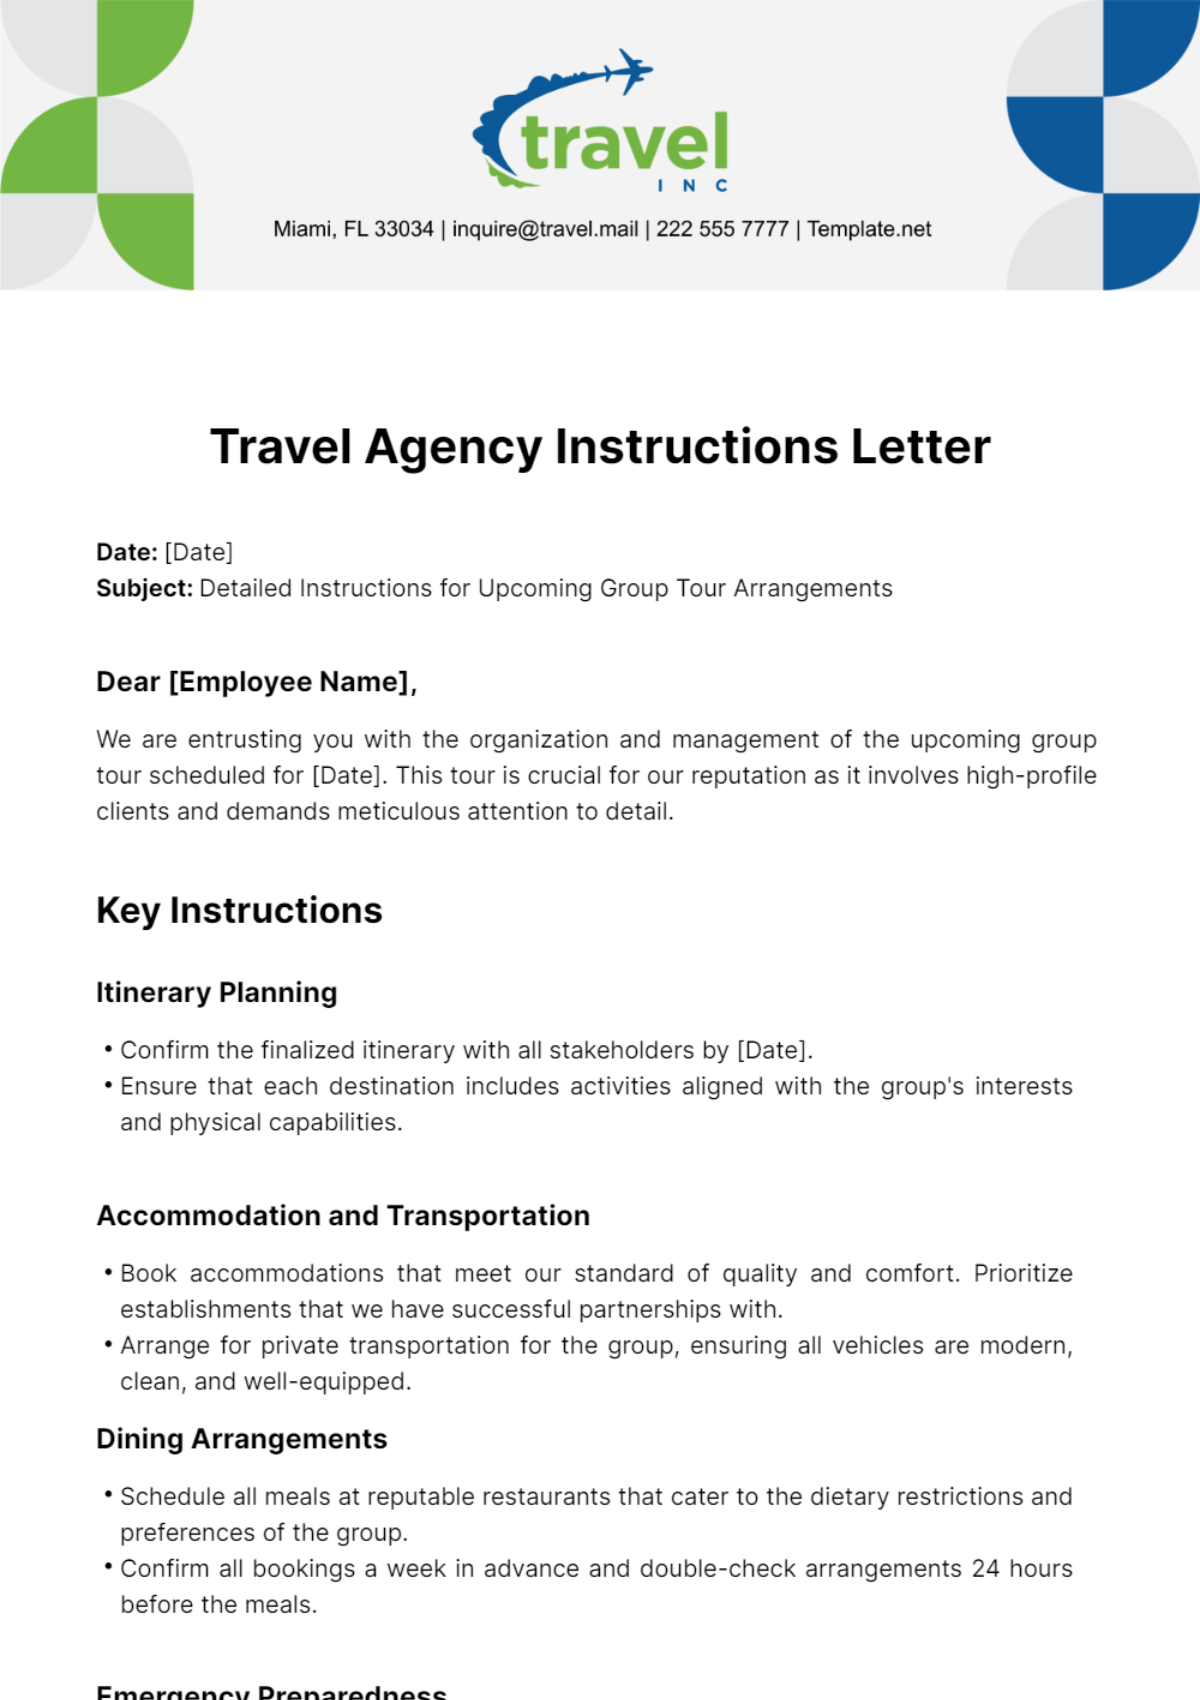 Travel Agency Instructions Letter Template